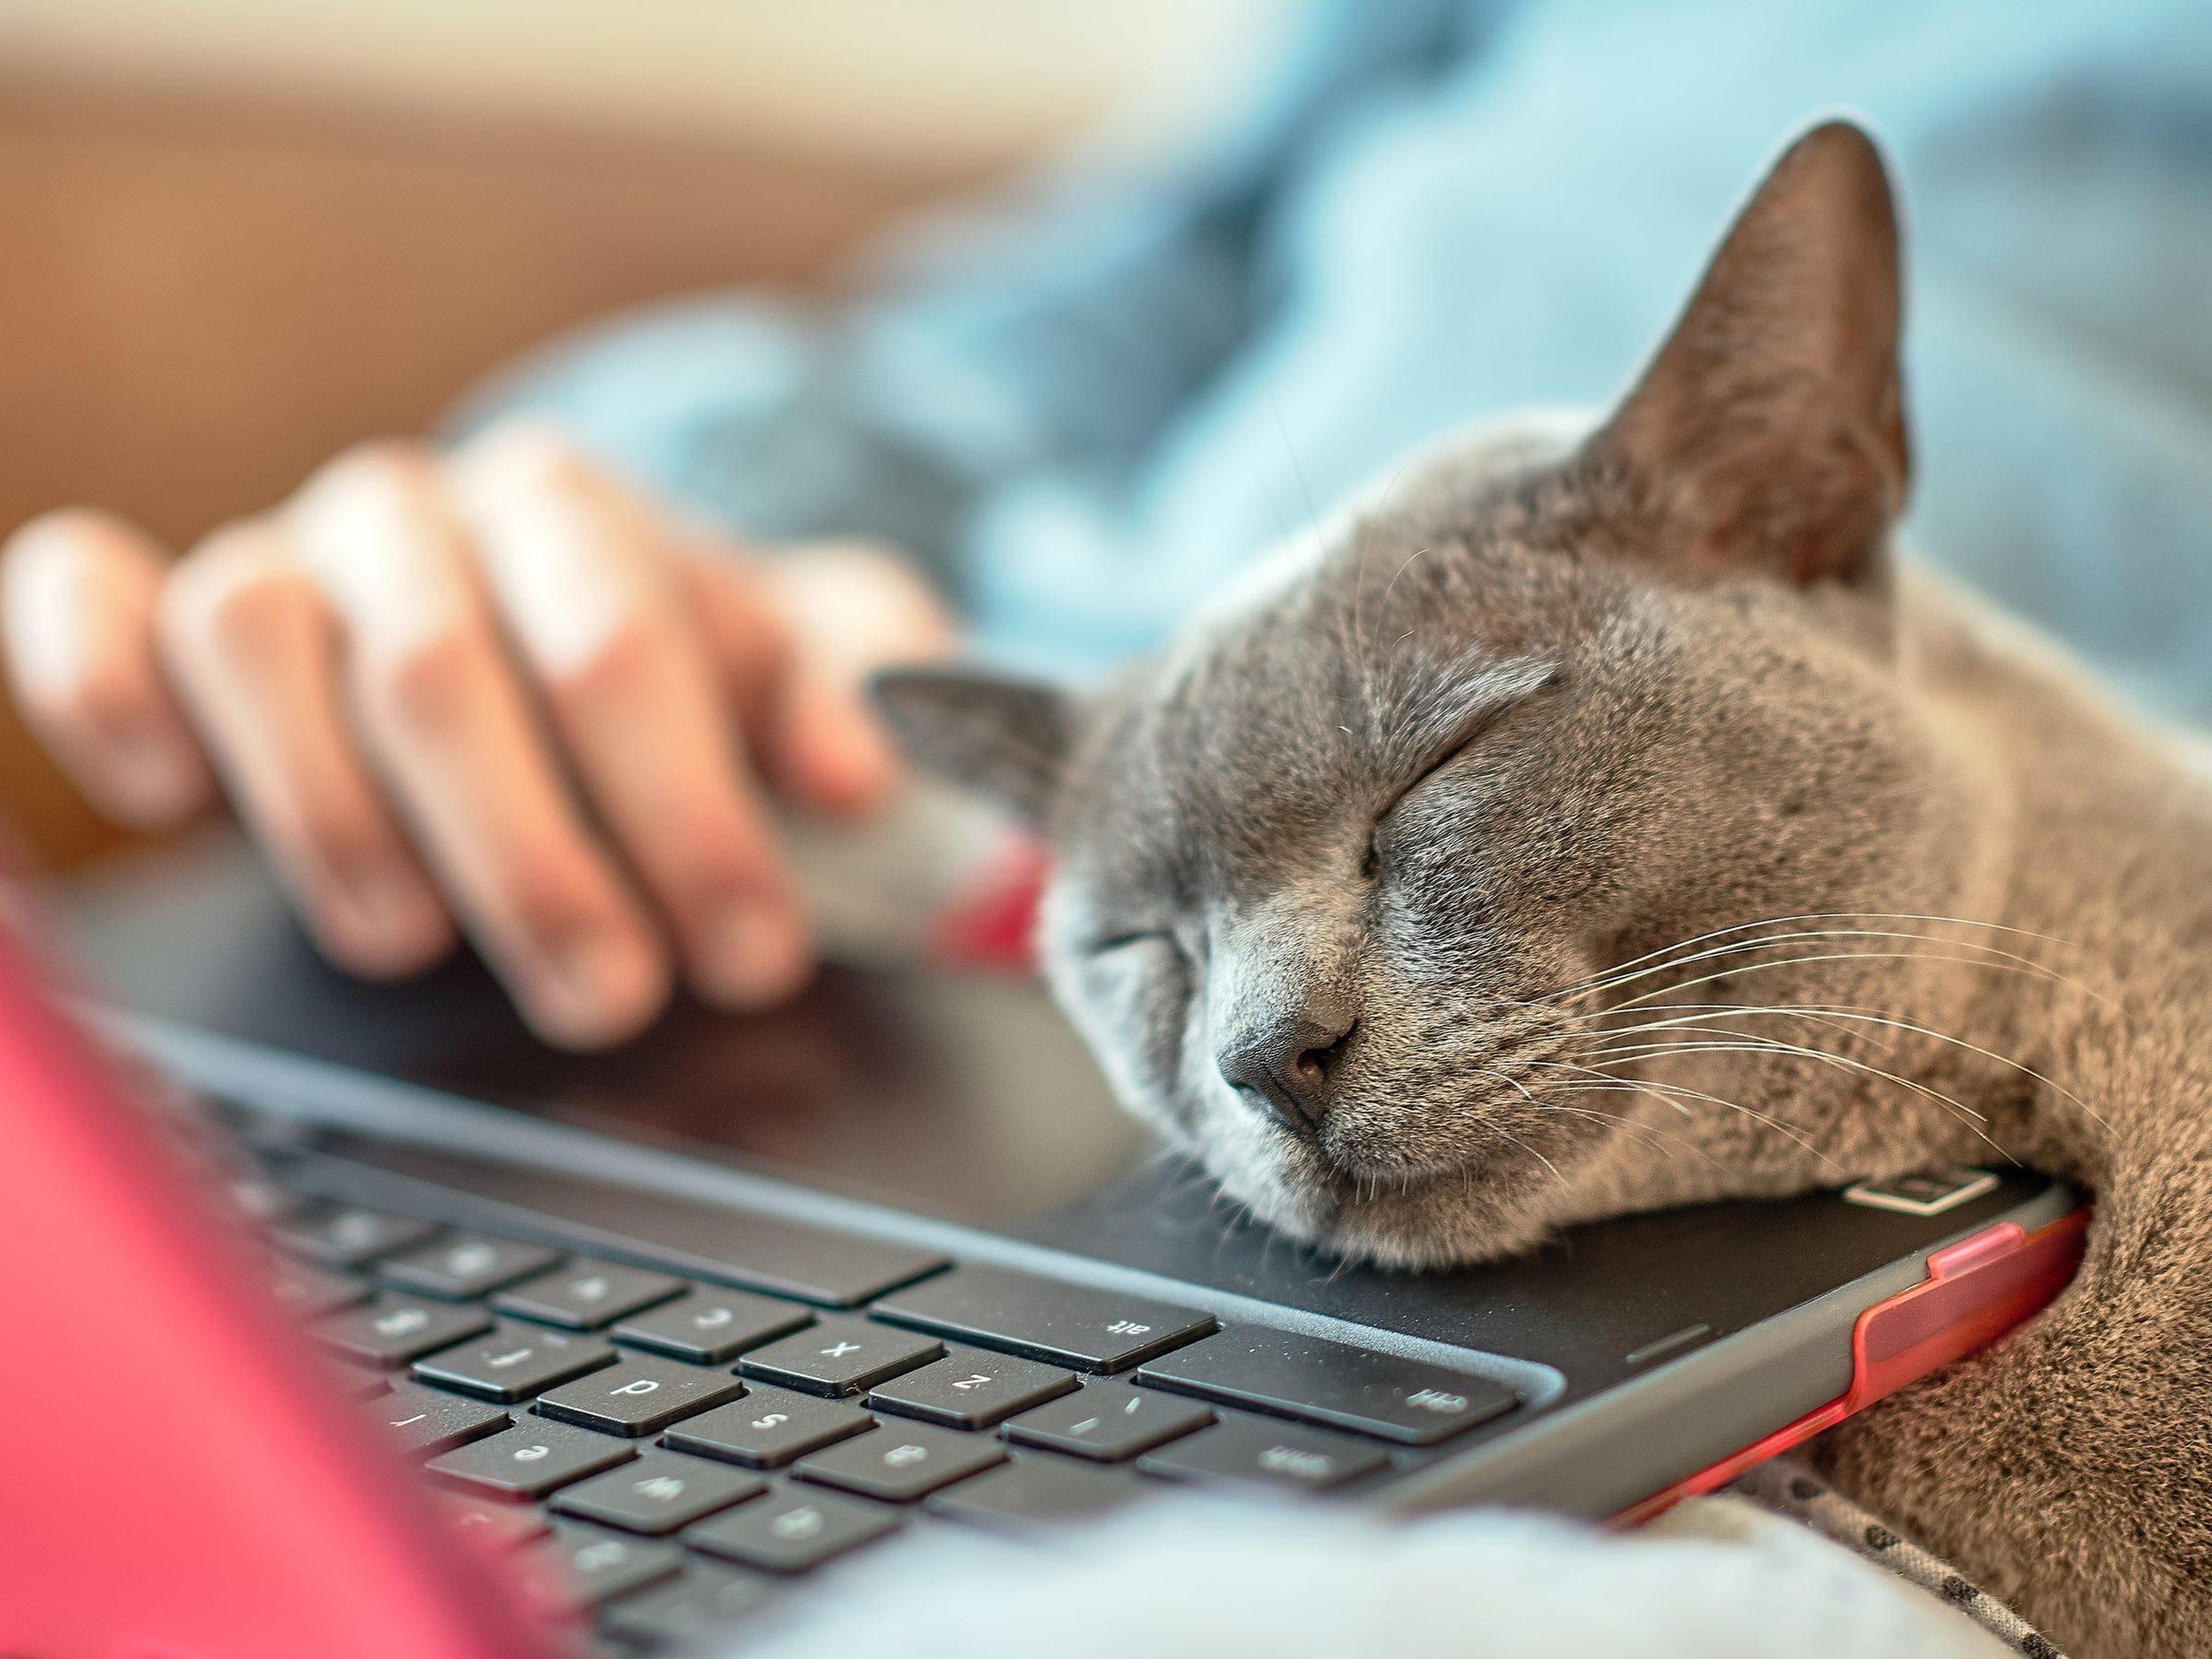 Working from home with a pet can be a peaceful but stressful experience for both you and your animal.